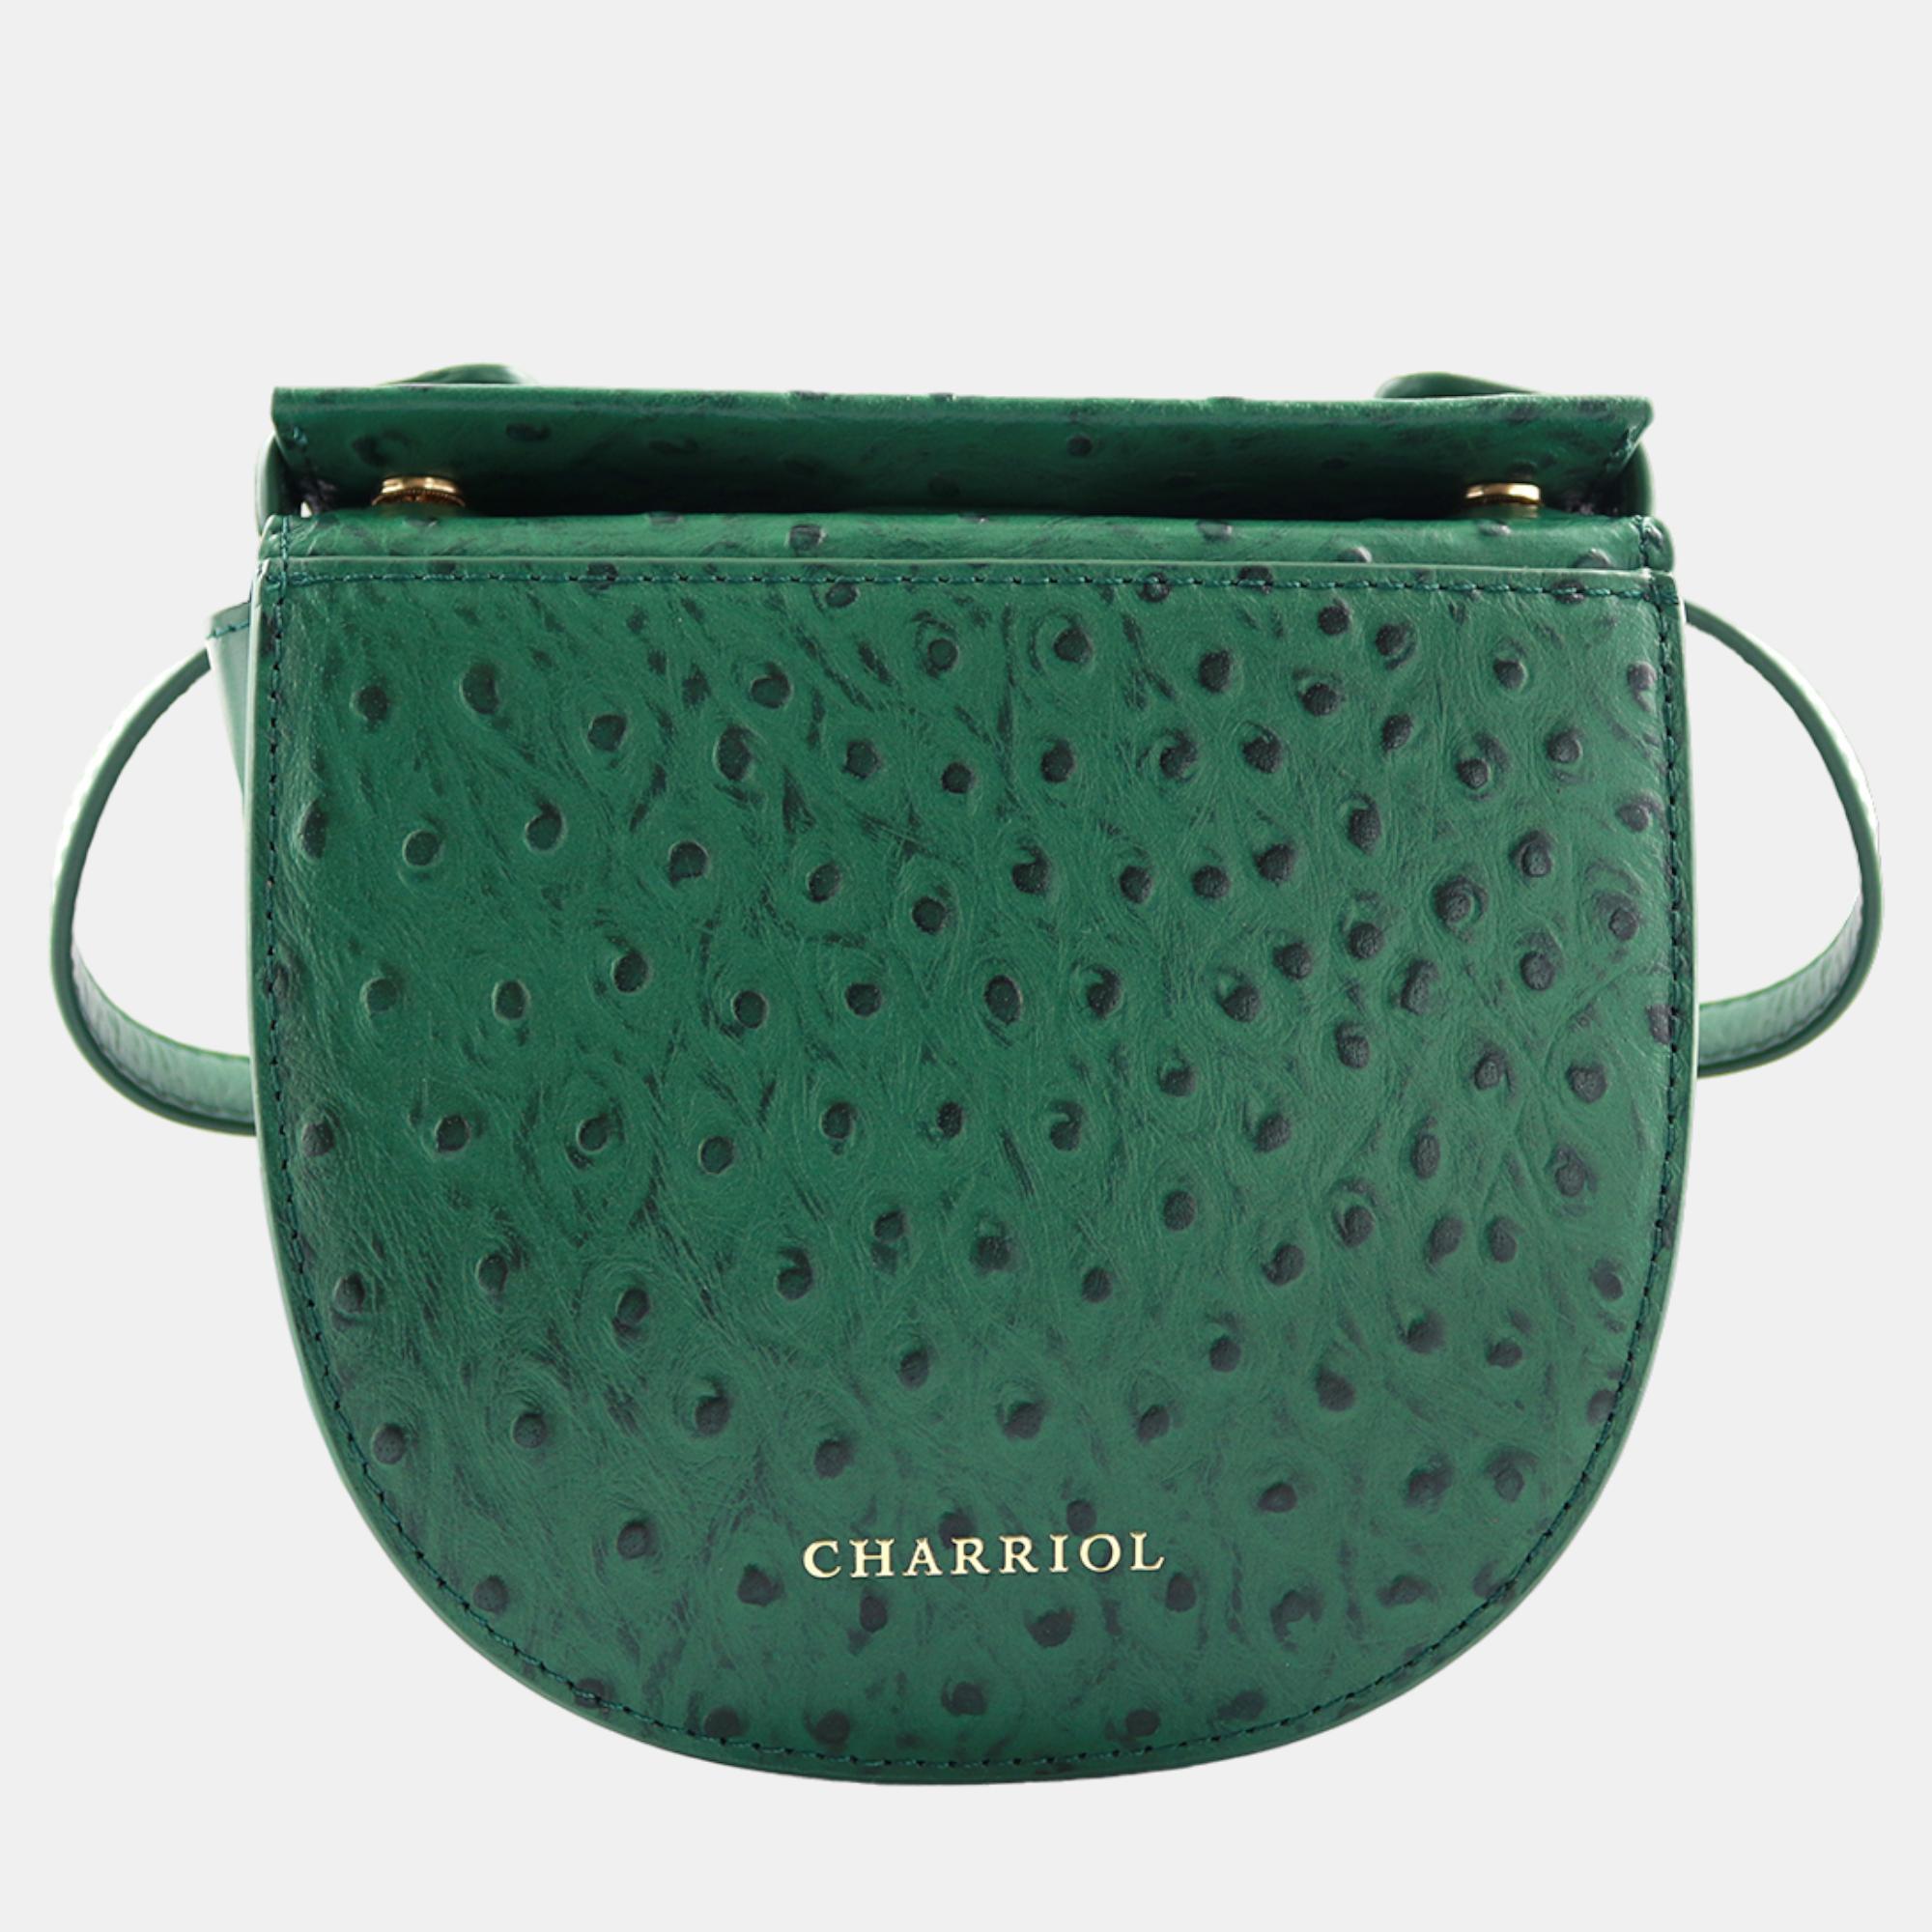 Charriol green leather passion ostrich crossbody